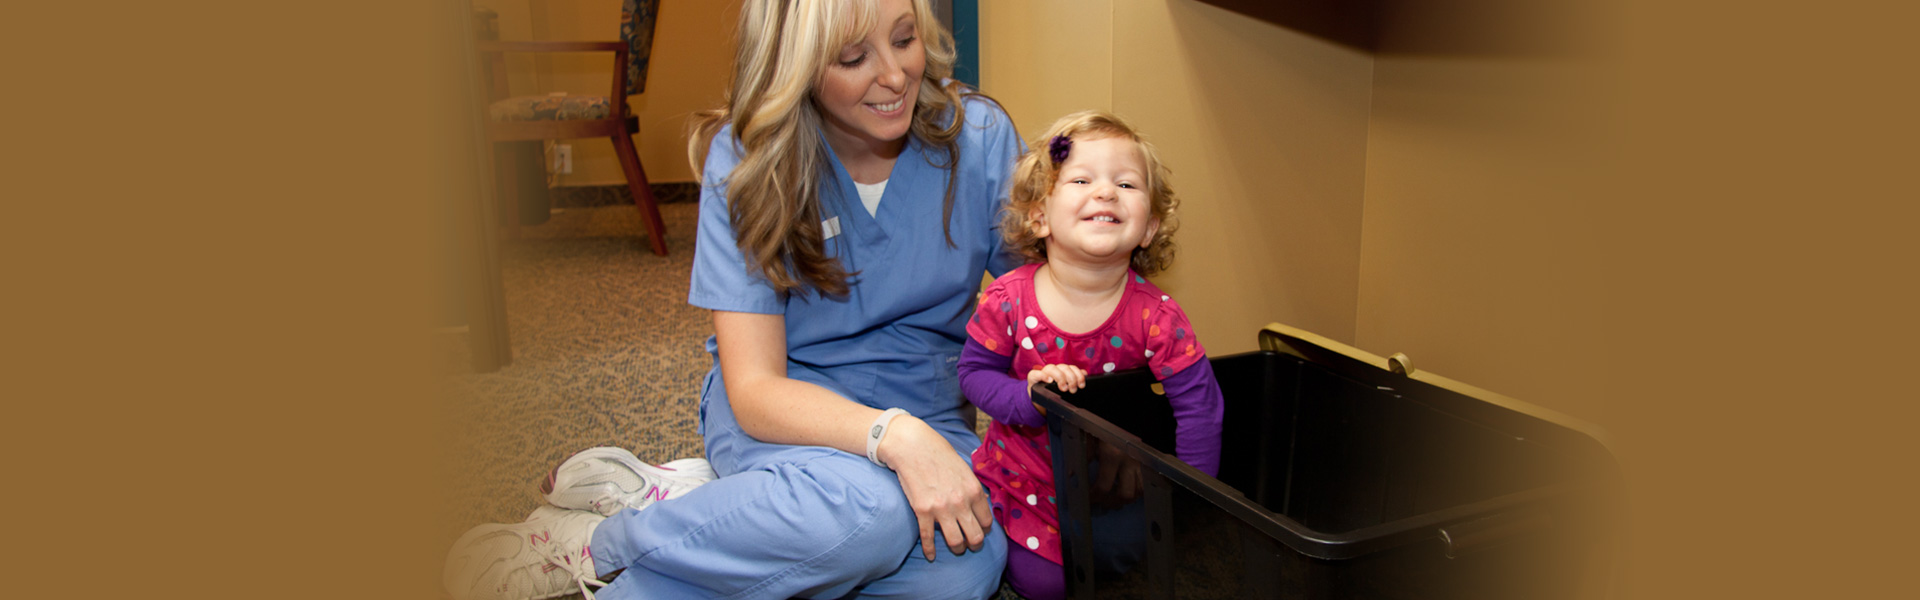 Caring Child-Friendly Dentistry